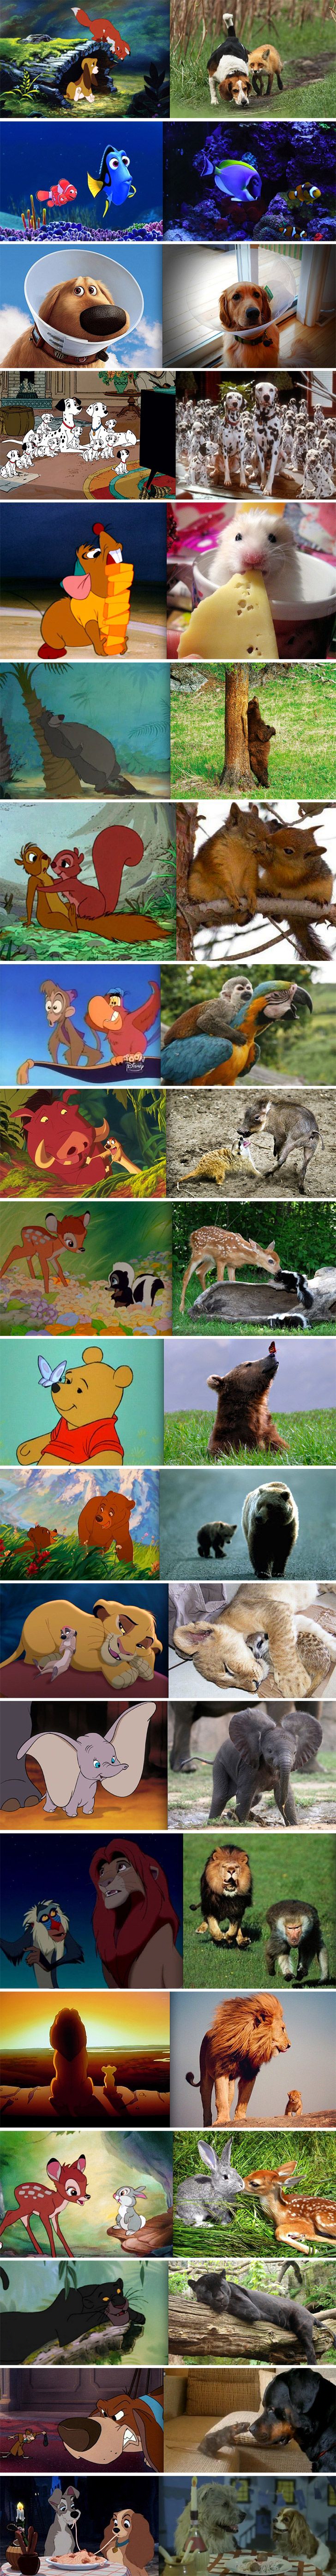 Disney characters in real life!:) Awwwwww